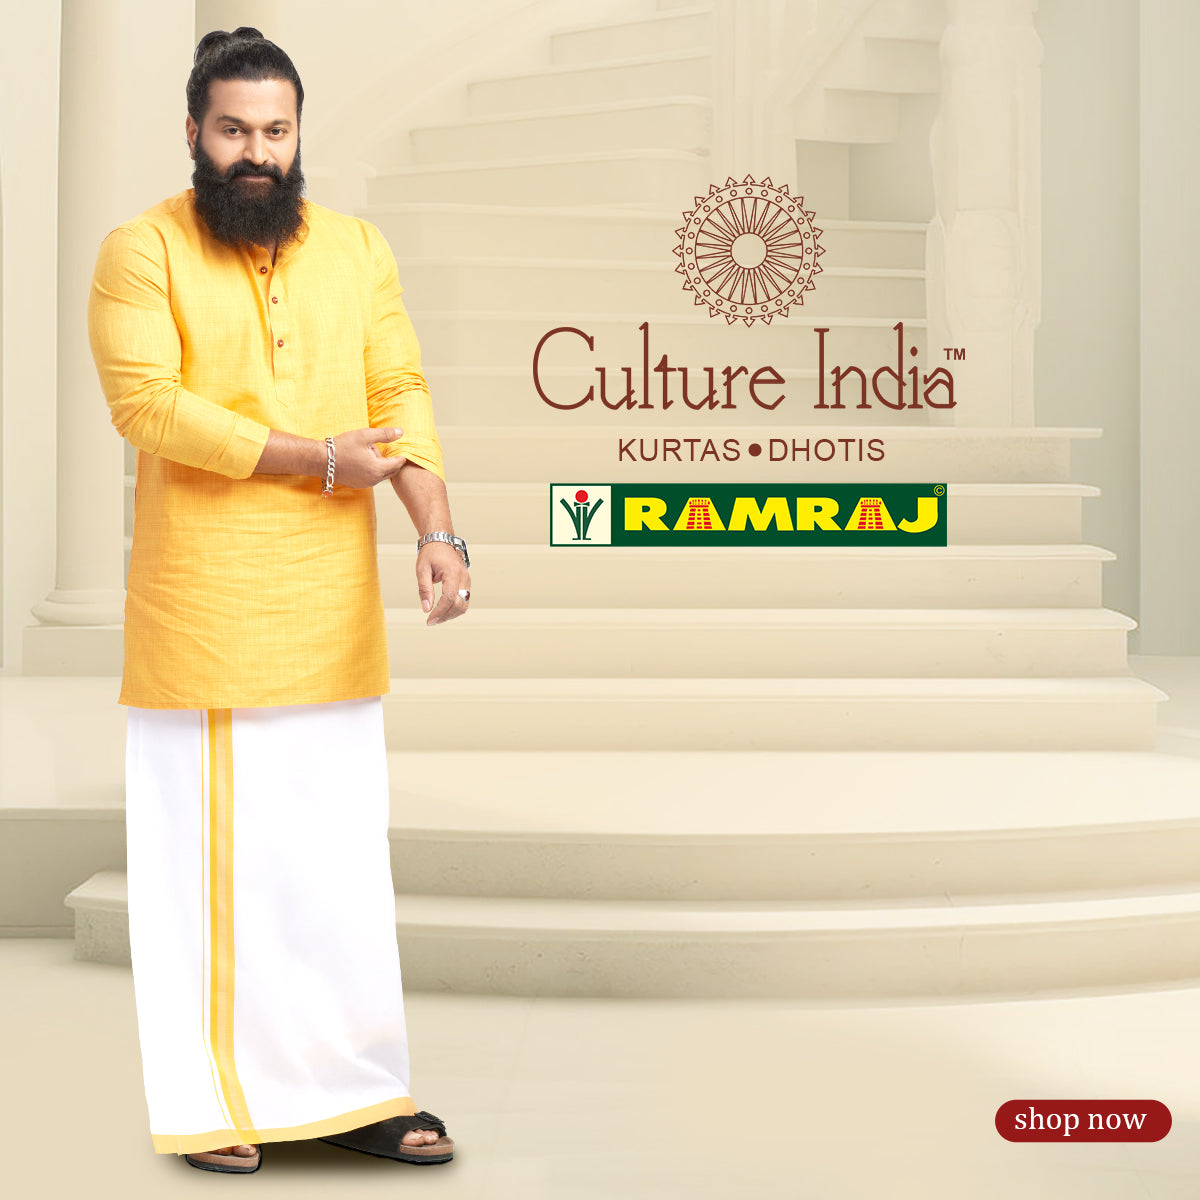 Ramraj Cotton - Be Vocal for Local! Buy 'Made in India' goods and